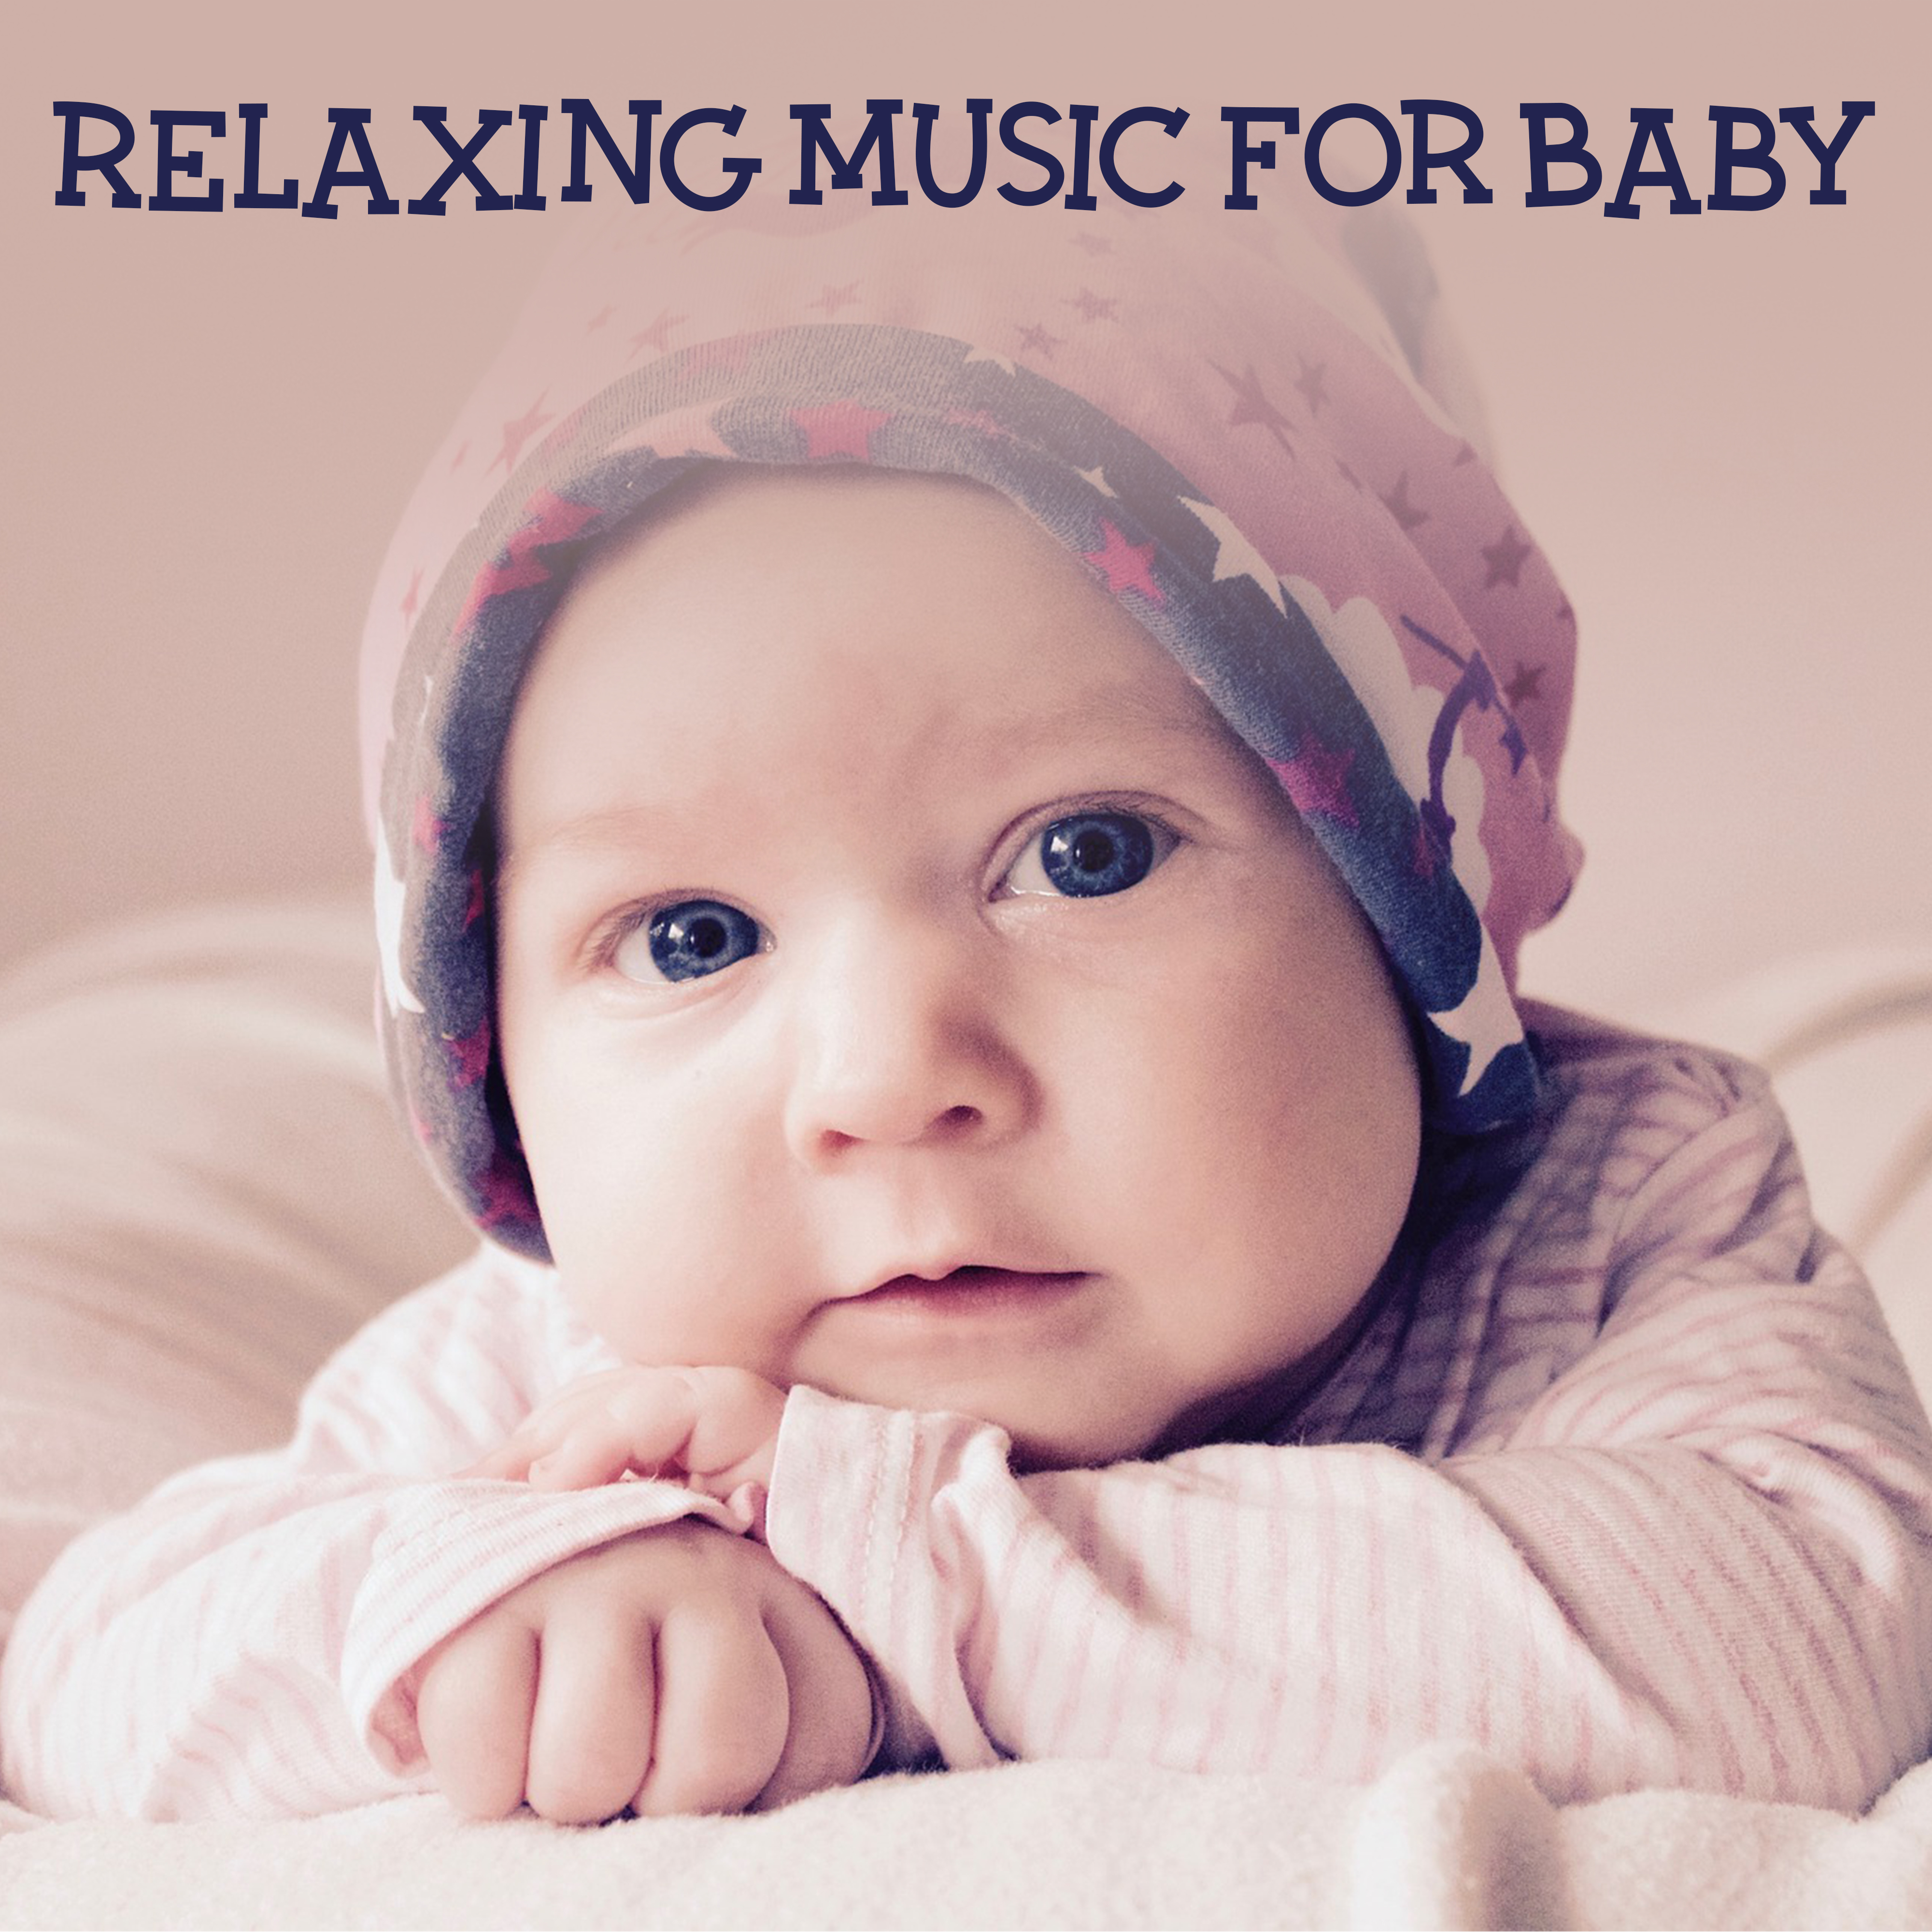 Relaxing Music for Baby  Sleeping Music for Baby, Sweet Lullabies for Baby to Calm Down, Relax  Sleep